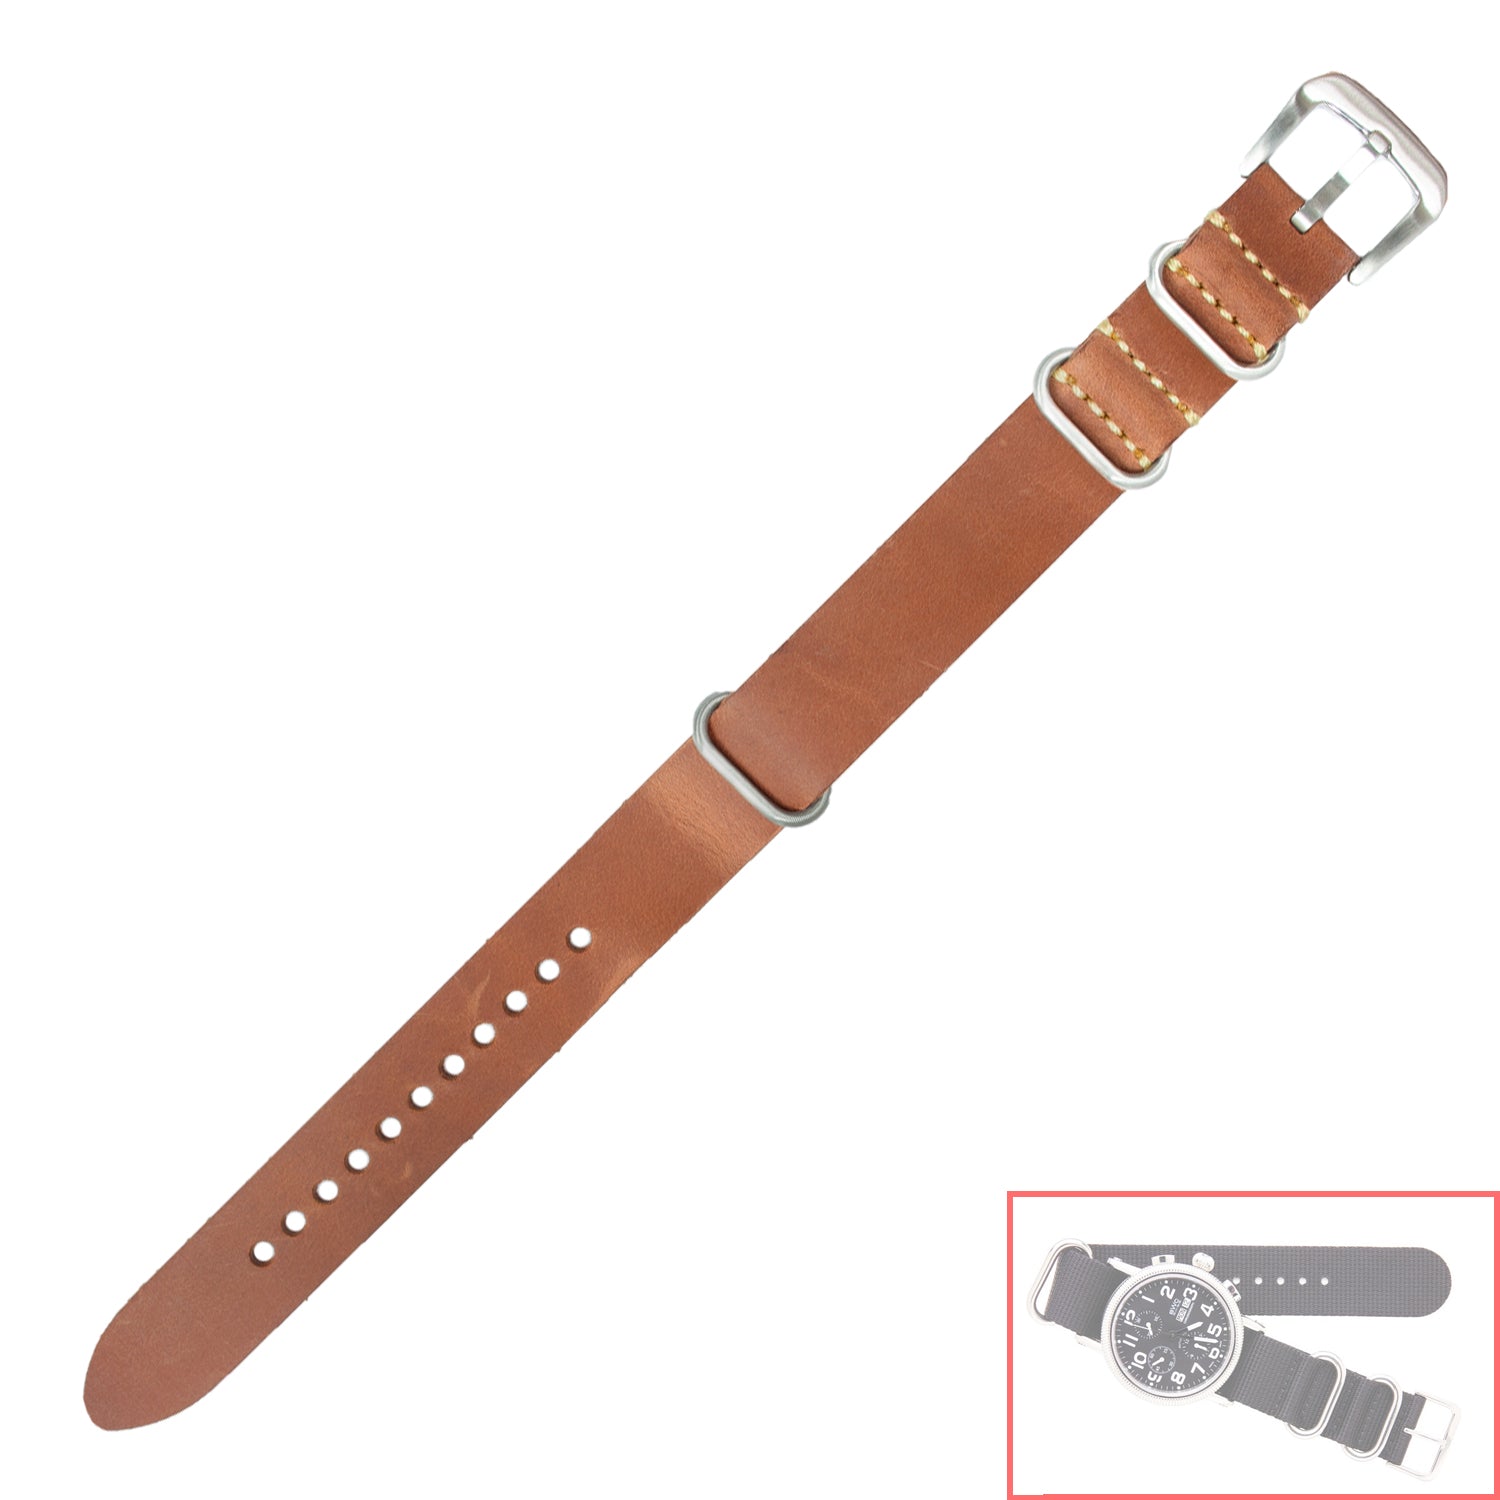 NSL No. 502 Genuine Leather Nato Style Straps with Brush Buckle  (20mm x 20mm)